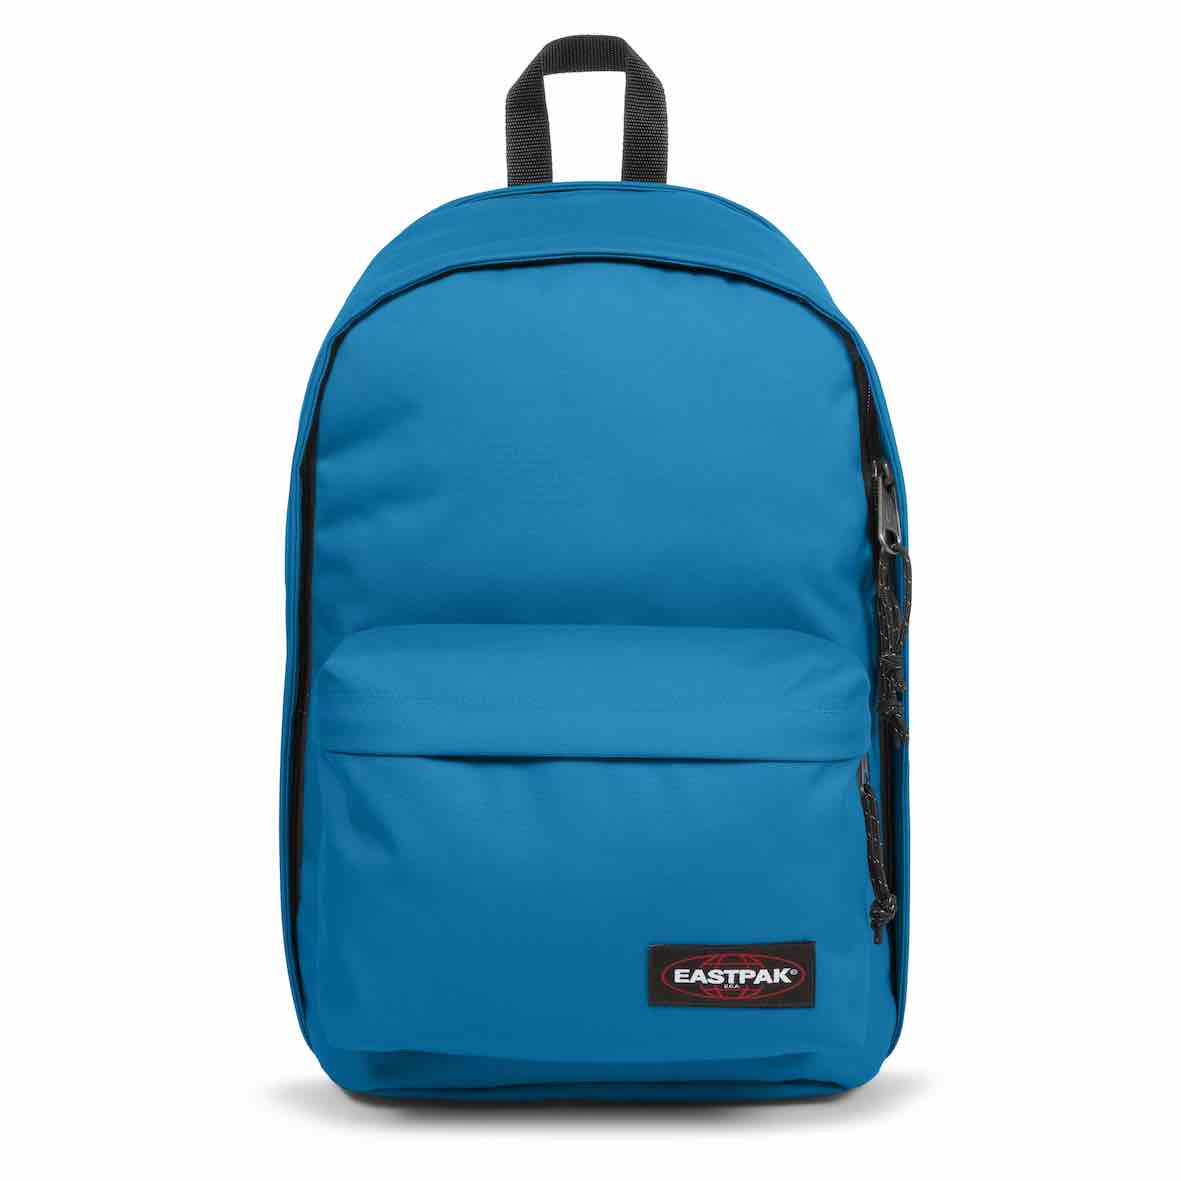 afstuderen patrouille Sneeuwwitje Eastpak Back to Work Rugzak 15 inch Voltaic B 4D5 - Topbags.nl